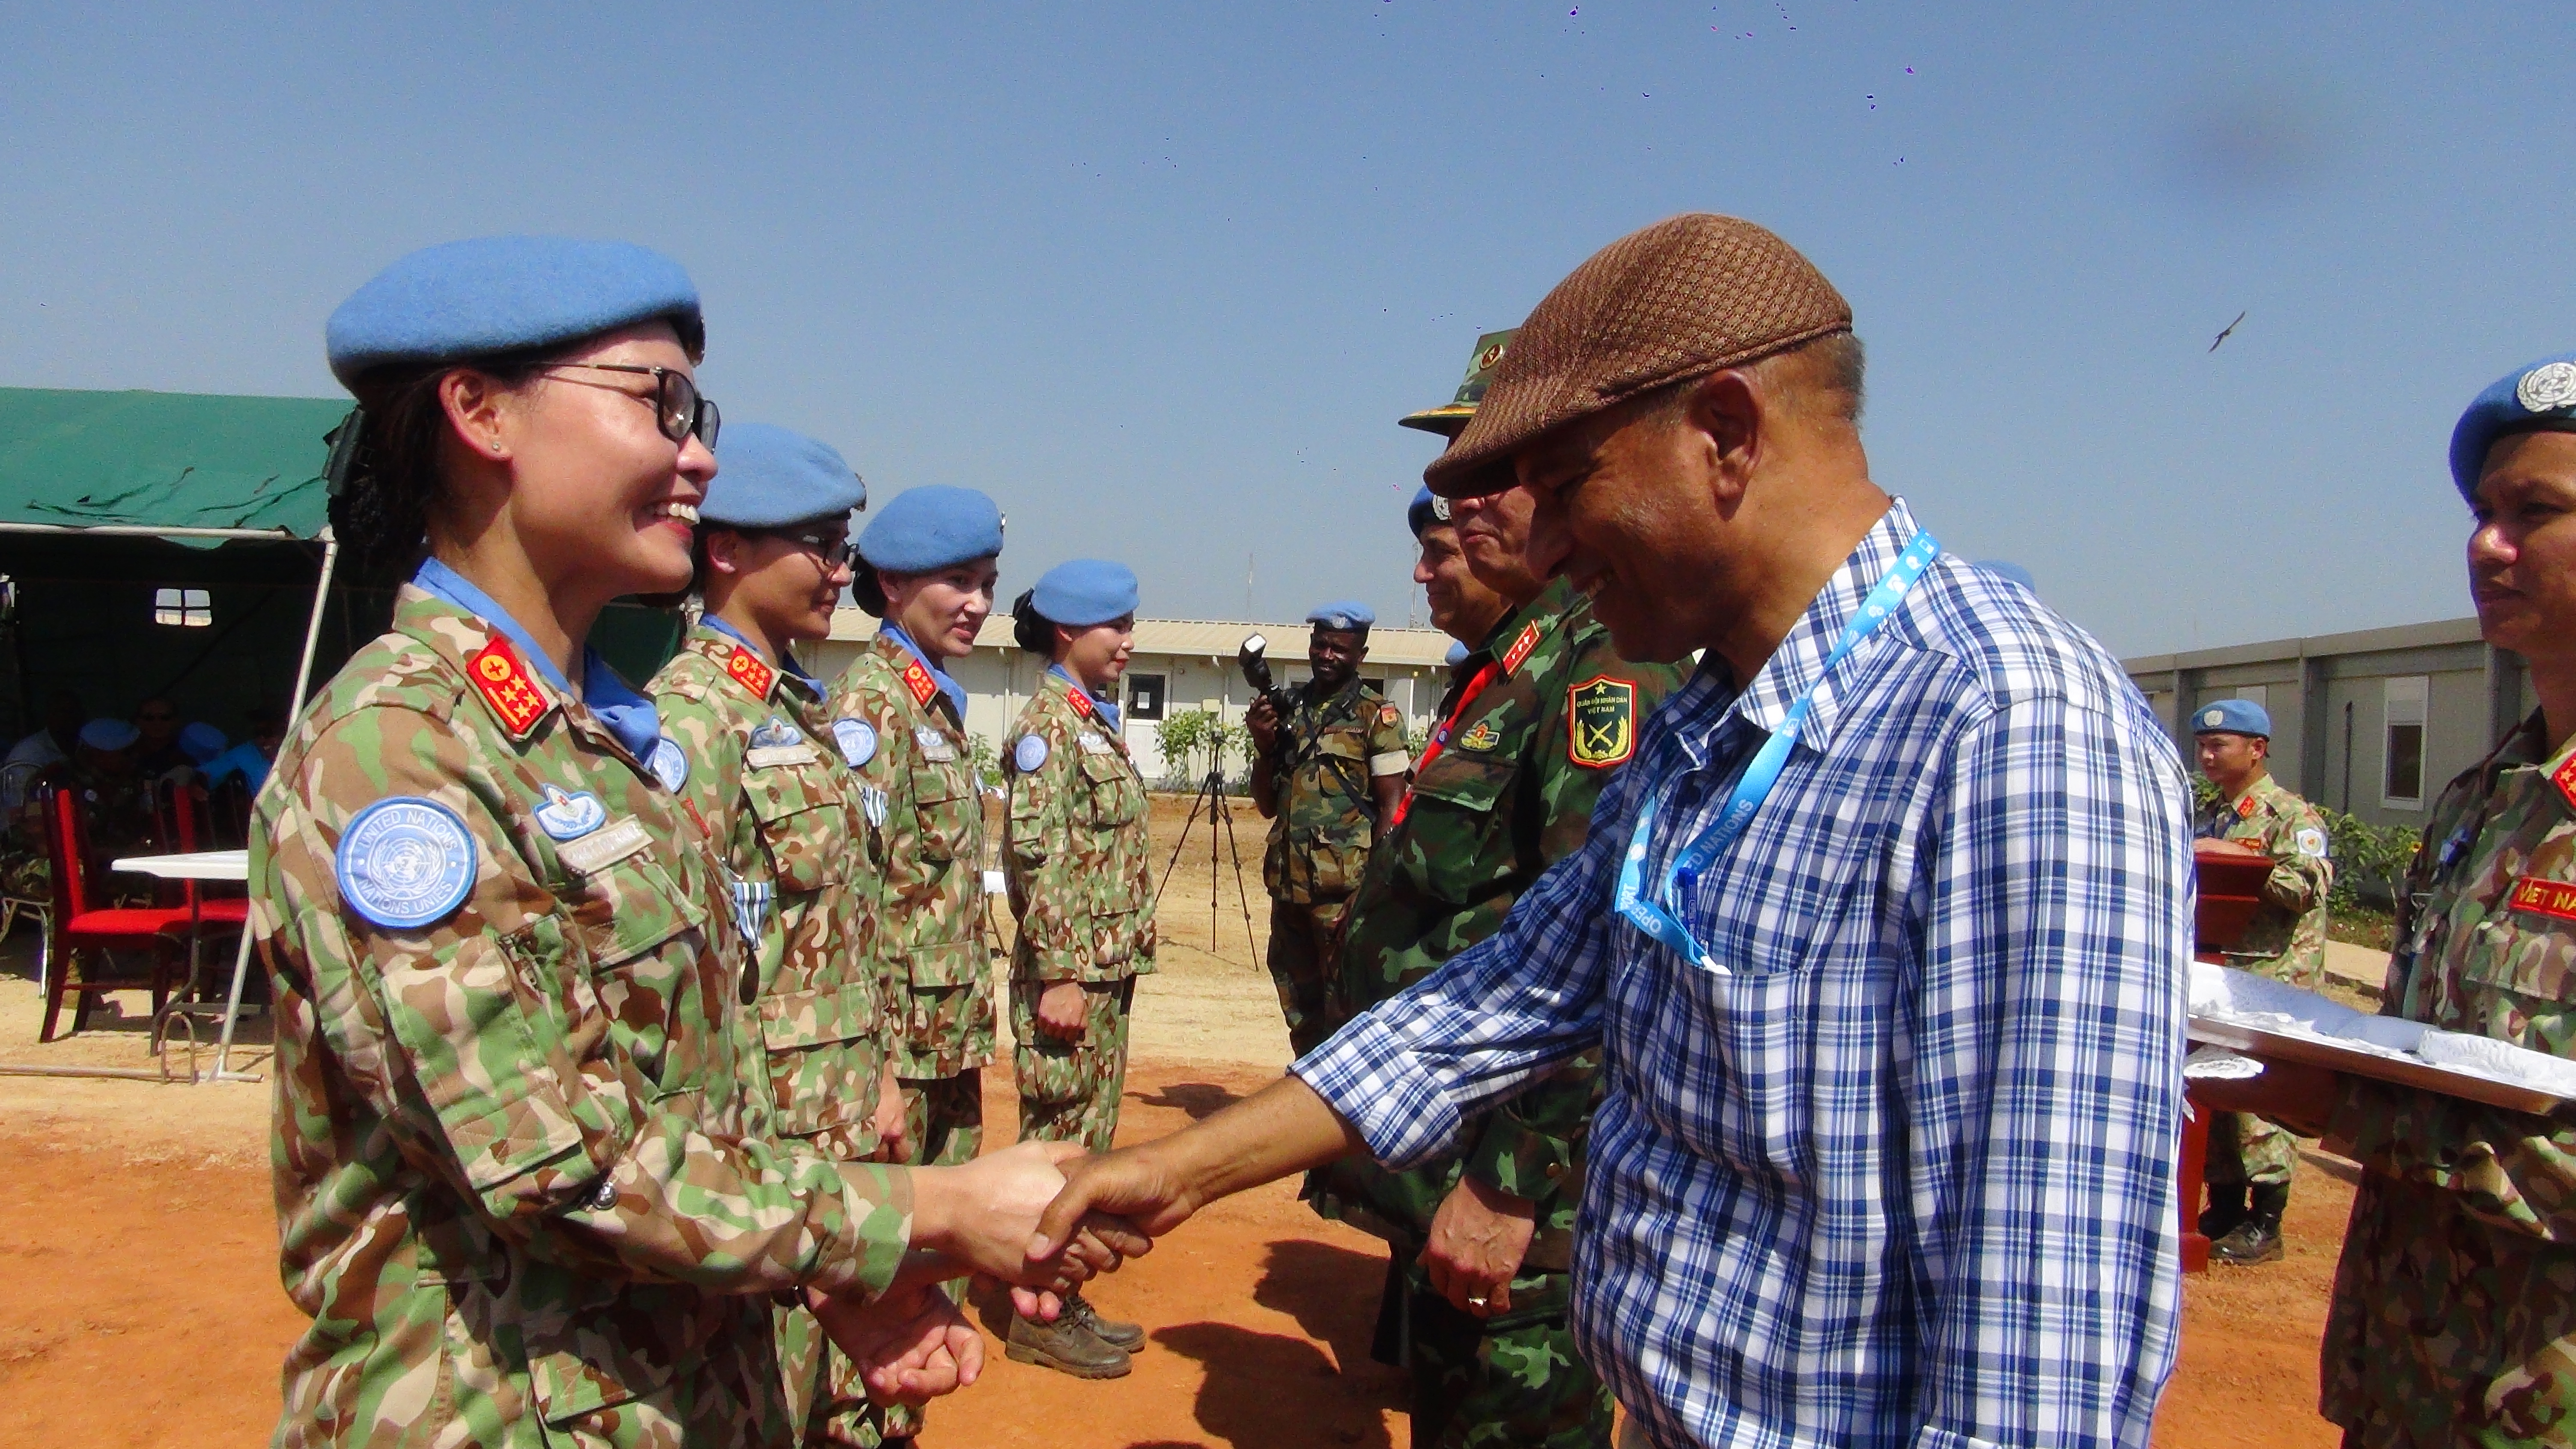 Exclusive long read: UN Mission in South Sudan – Vietnamese doctors help heal the wounds